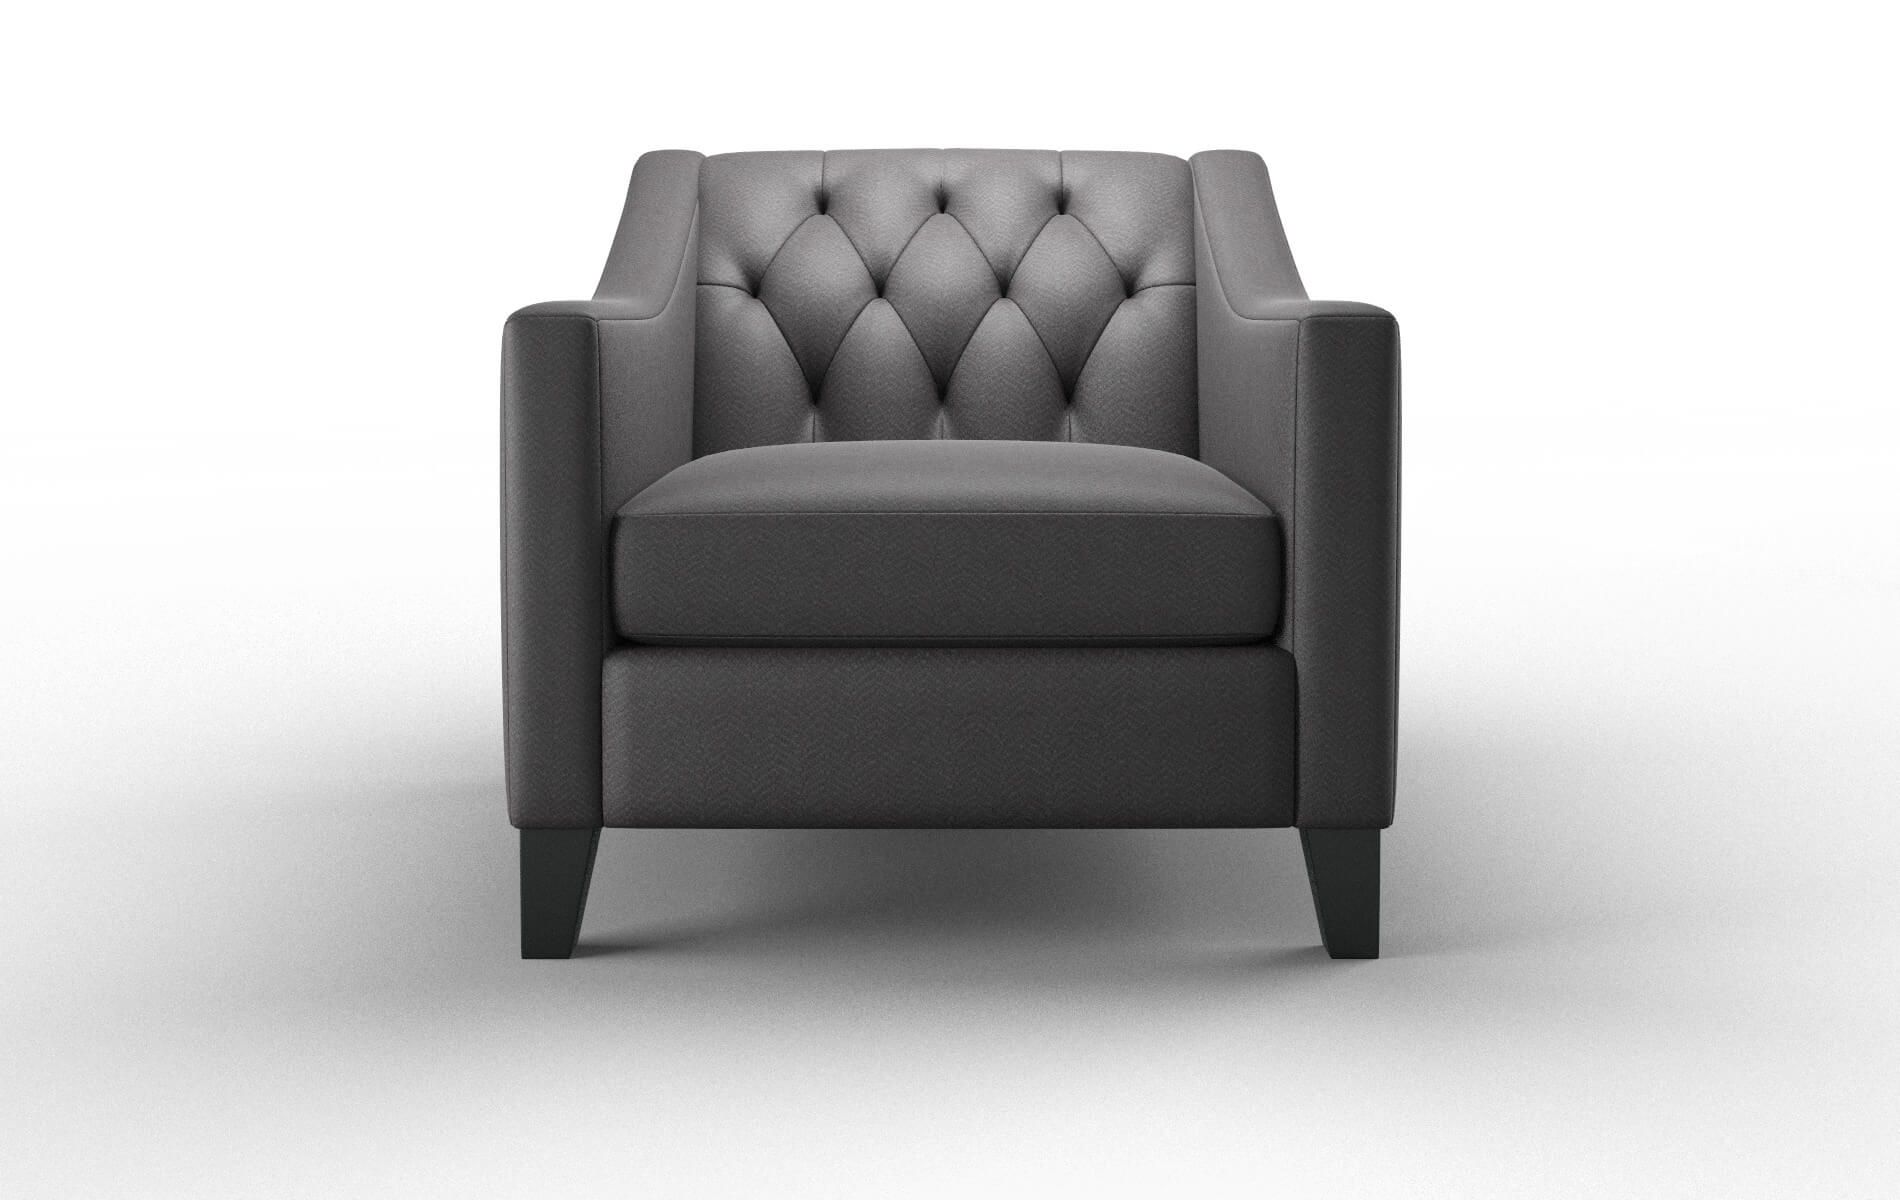 Seville Catalina Charcoal chair espresso legs